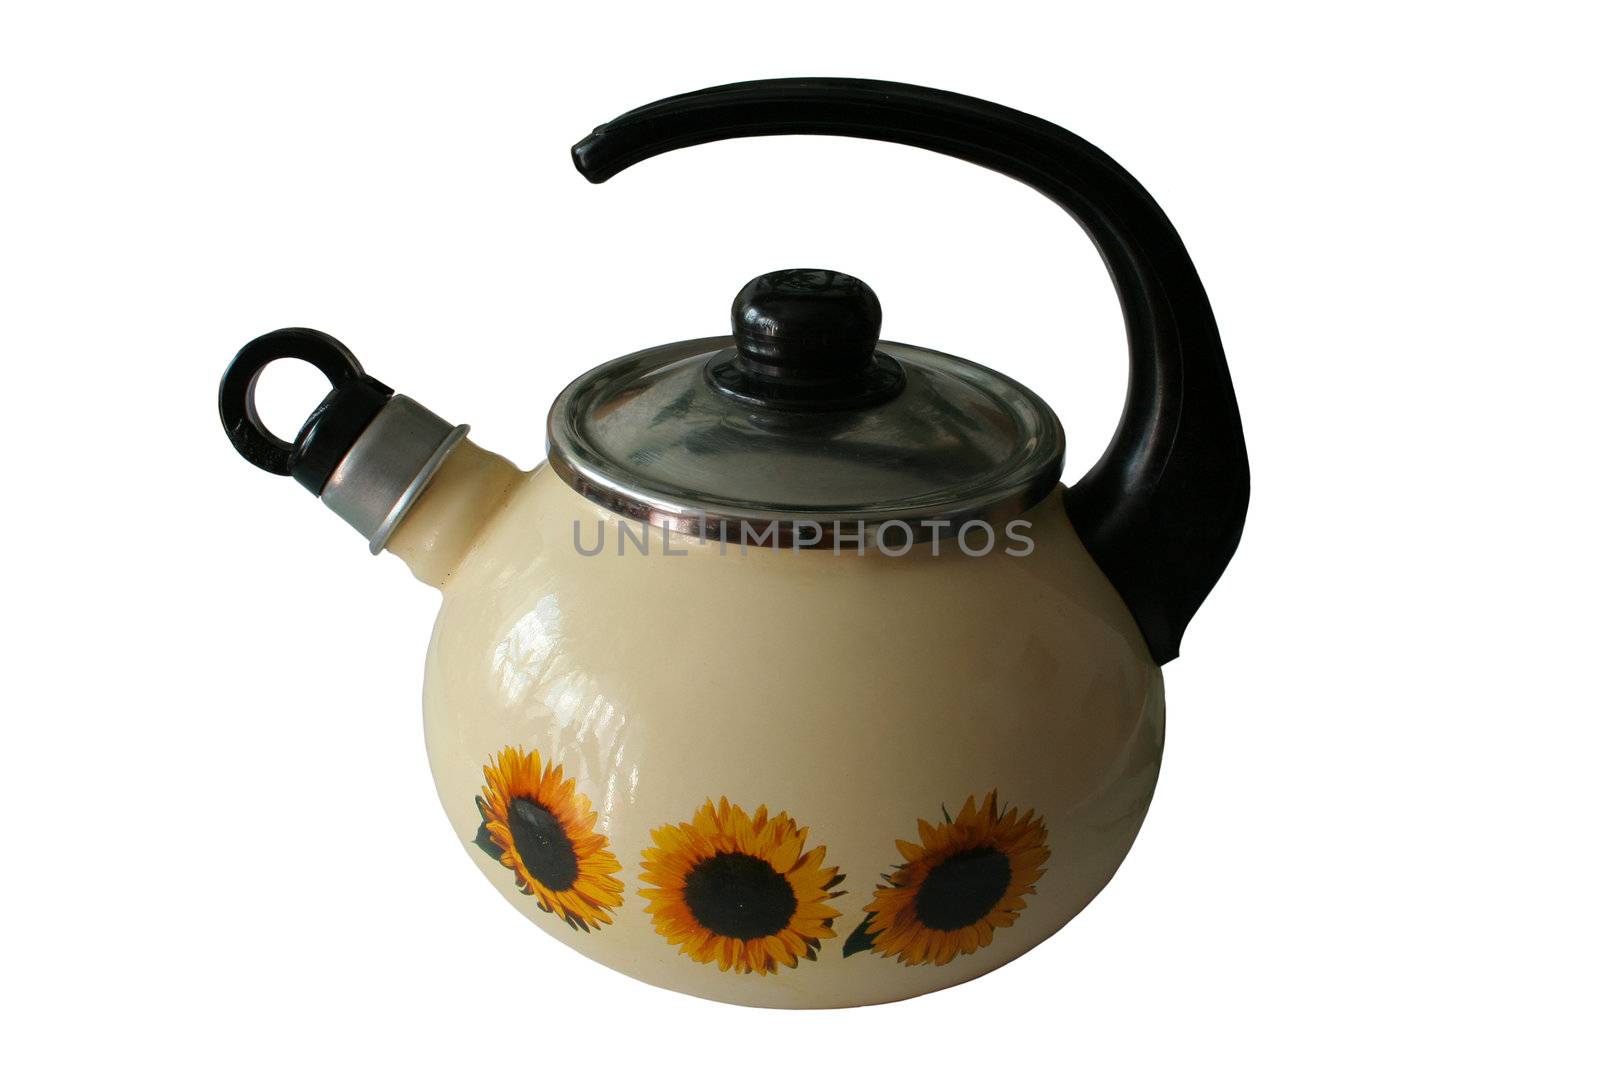 old kettle isolated on white background with clipping path